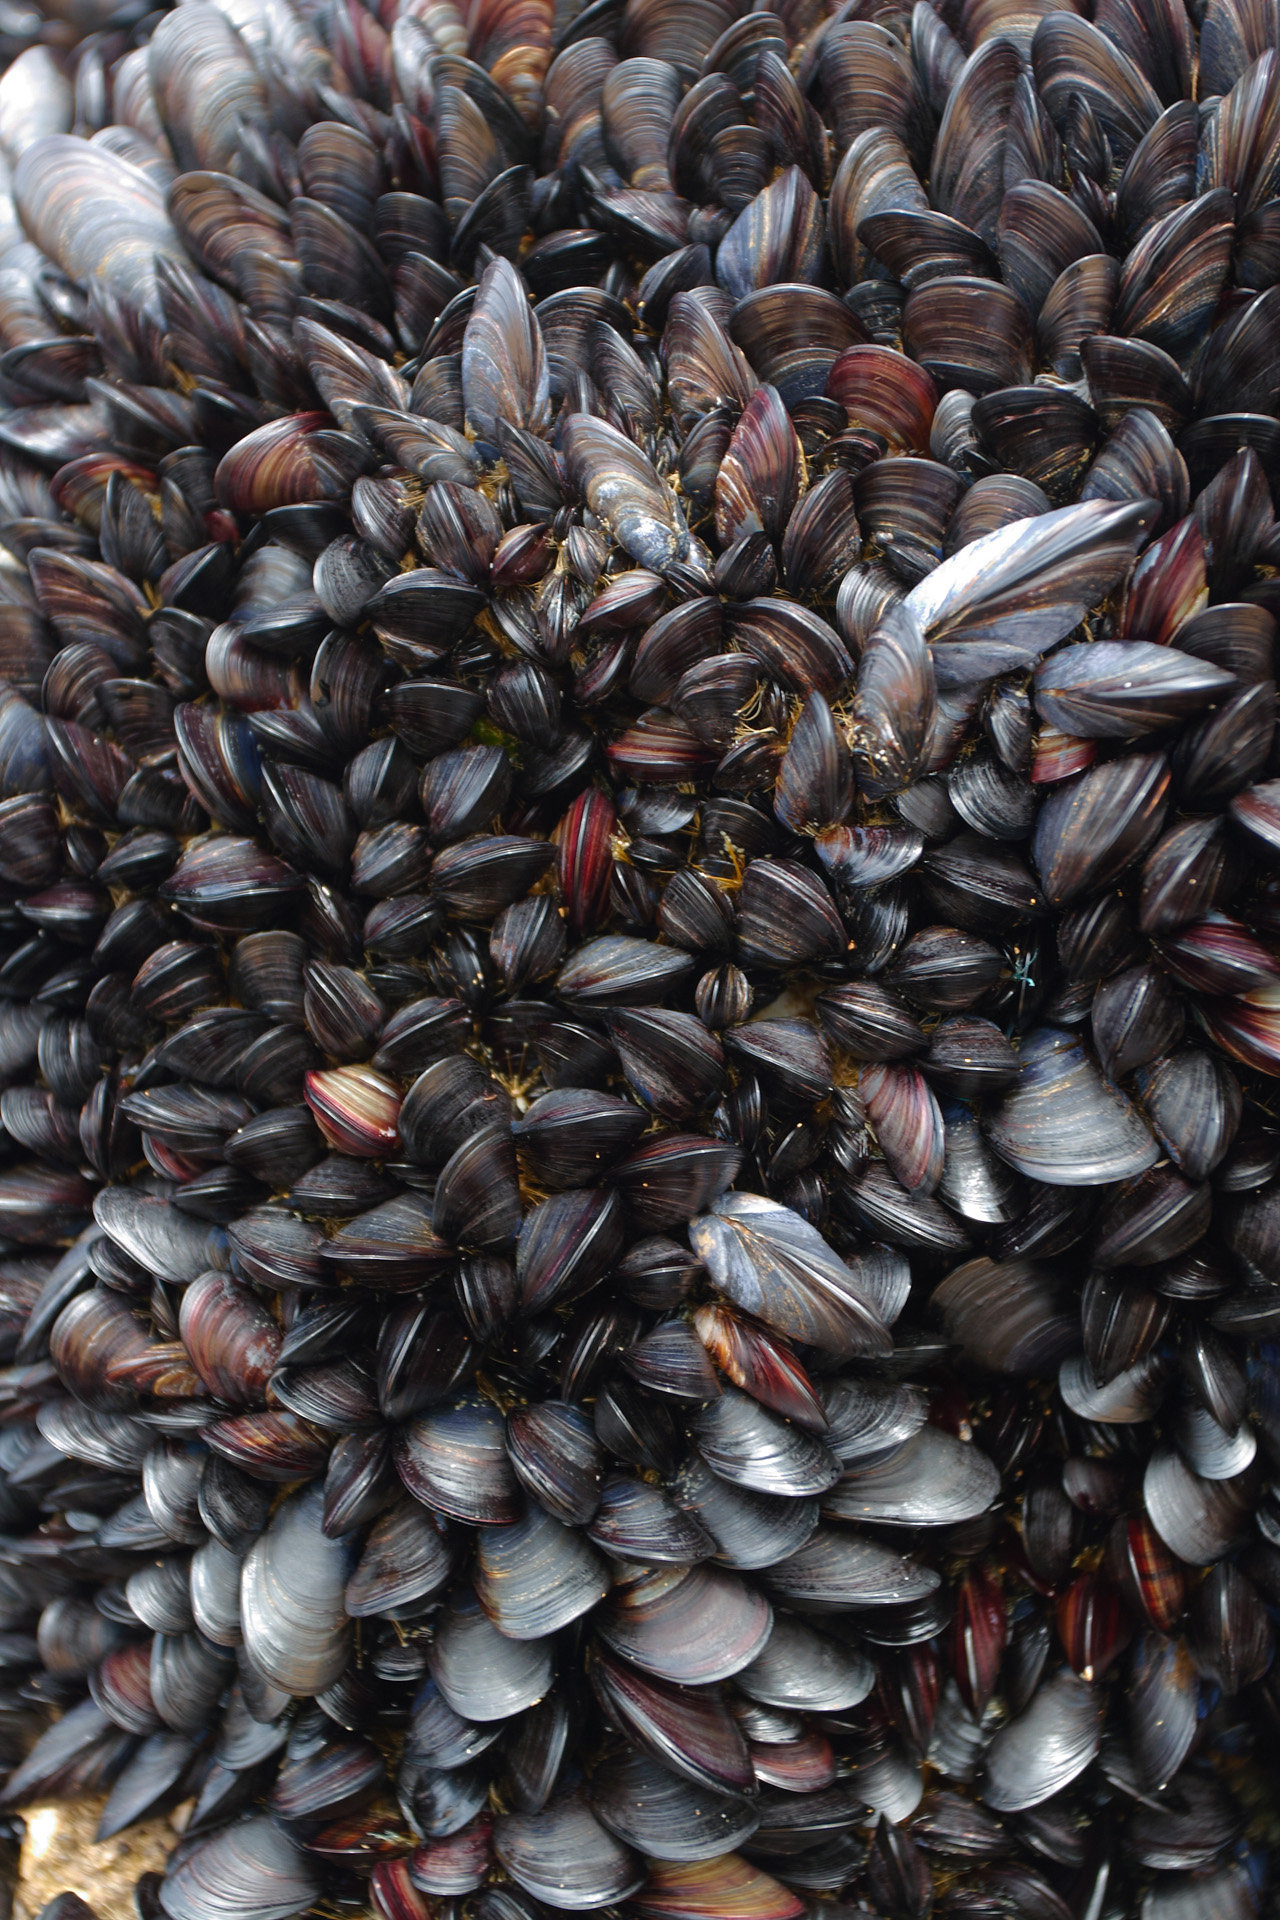 Mussels densely packed on the rocks at Bedruthan Steps